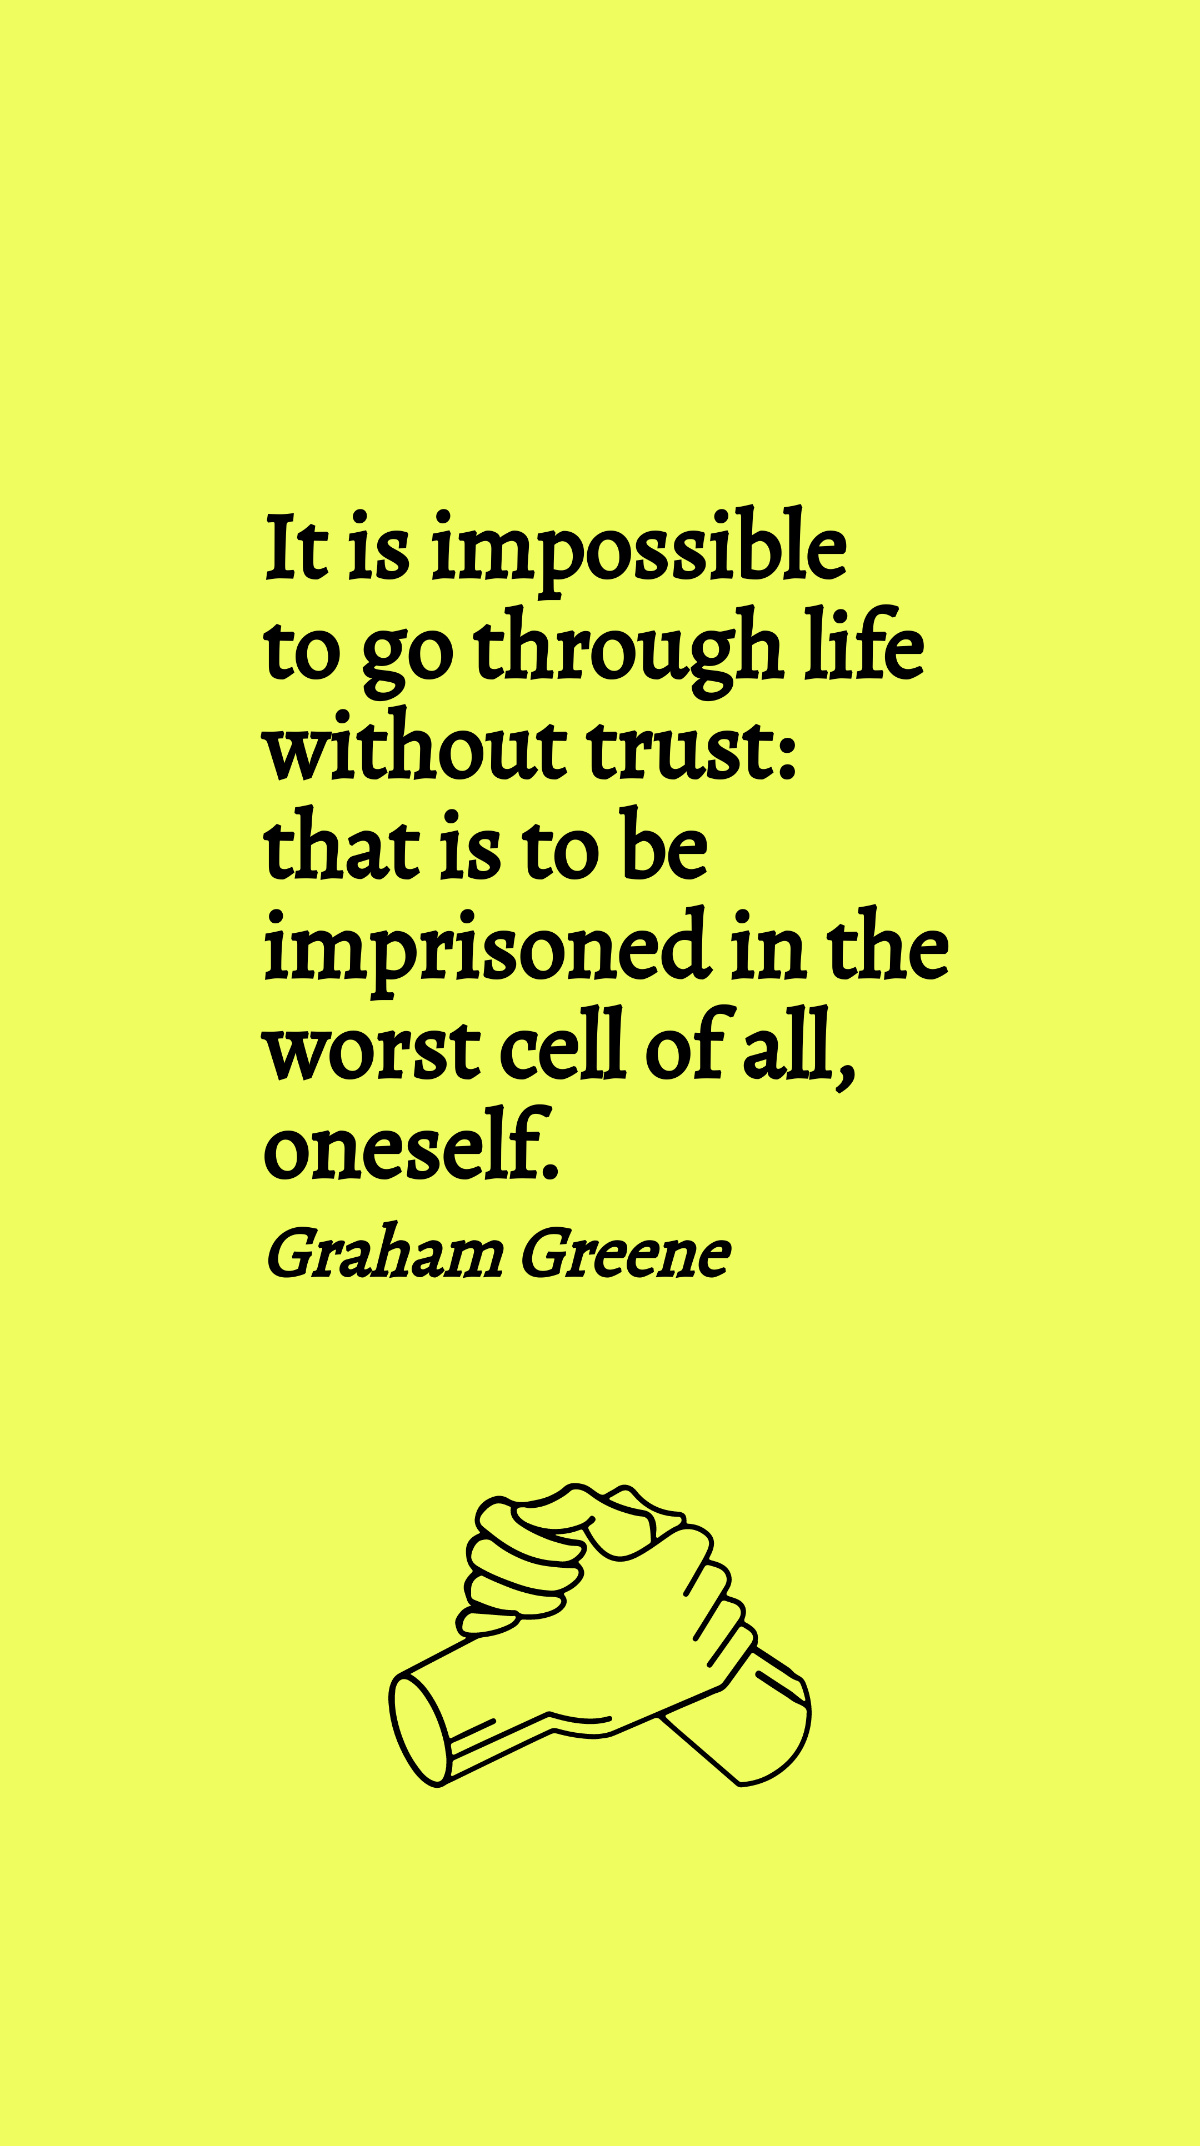 Graham Greene - It is impossible to go through life without trust: that is to be imprisoned in the worst cell of all, oneself. Template